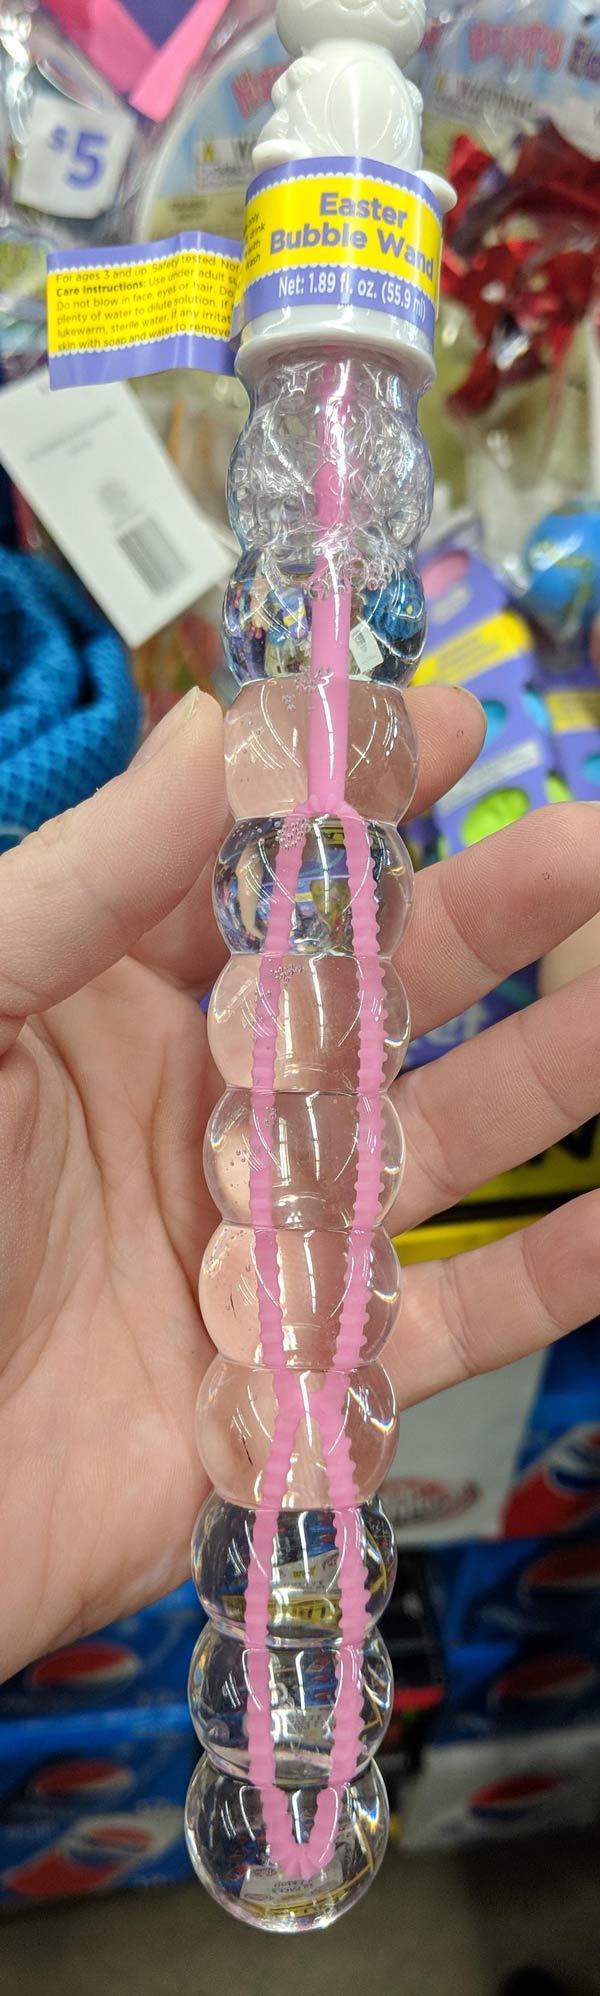 Had to do a double take at the Dollar Store